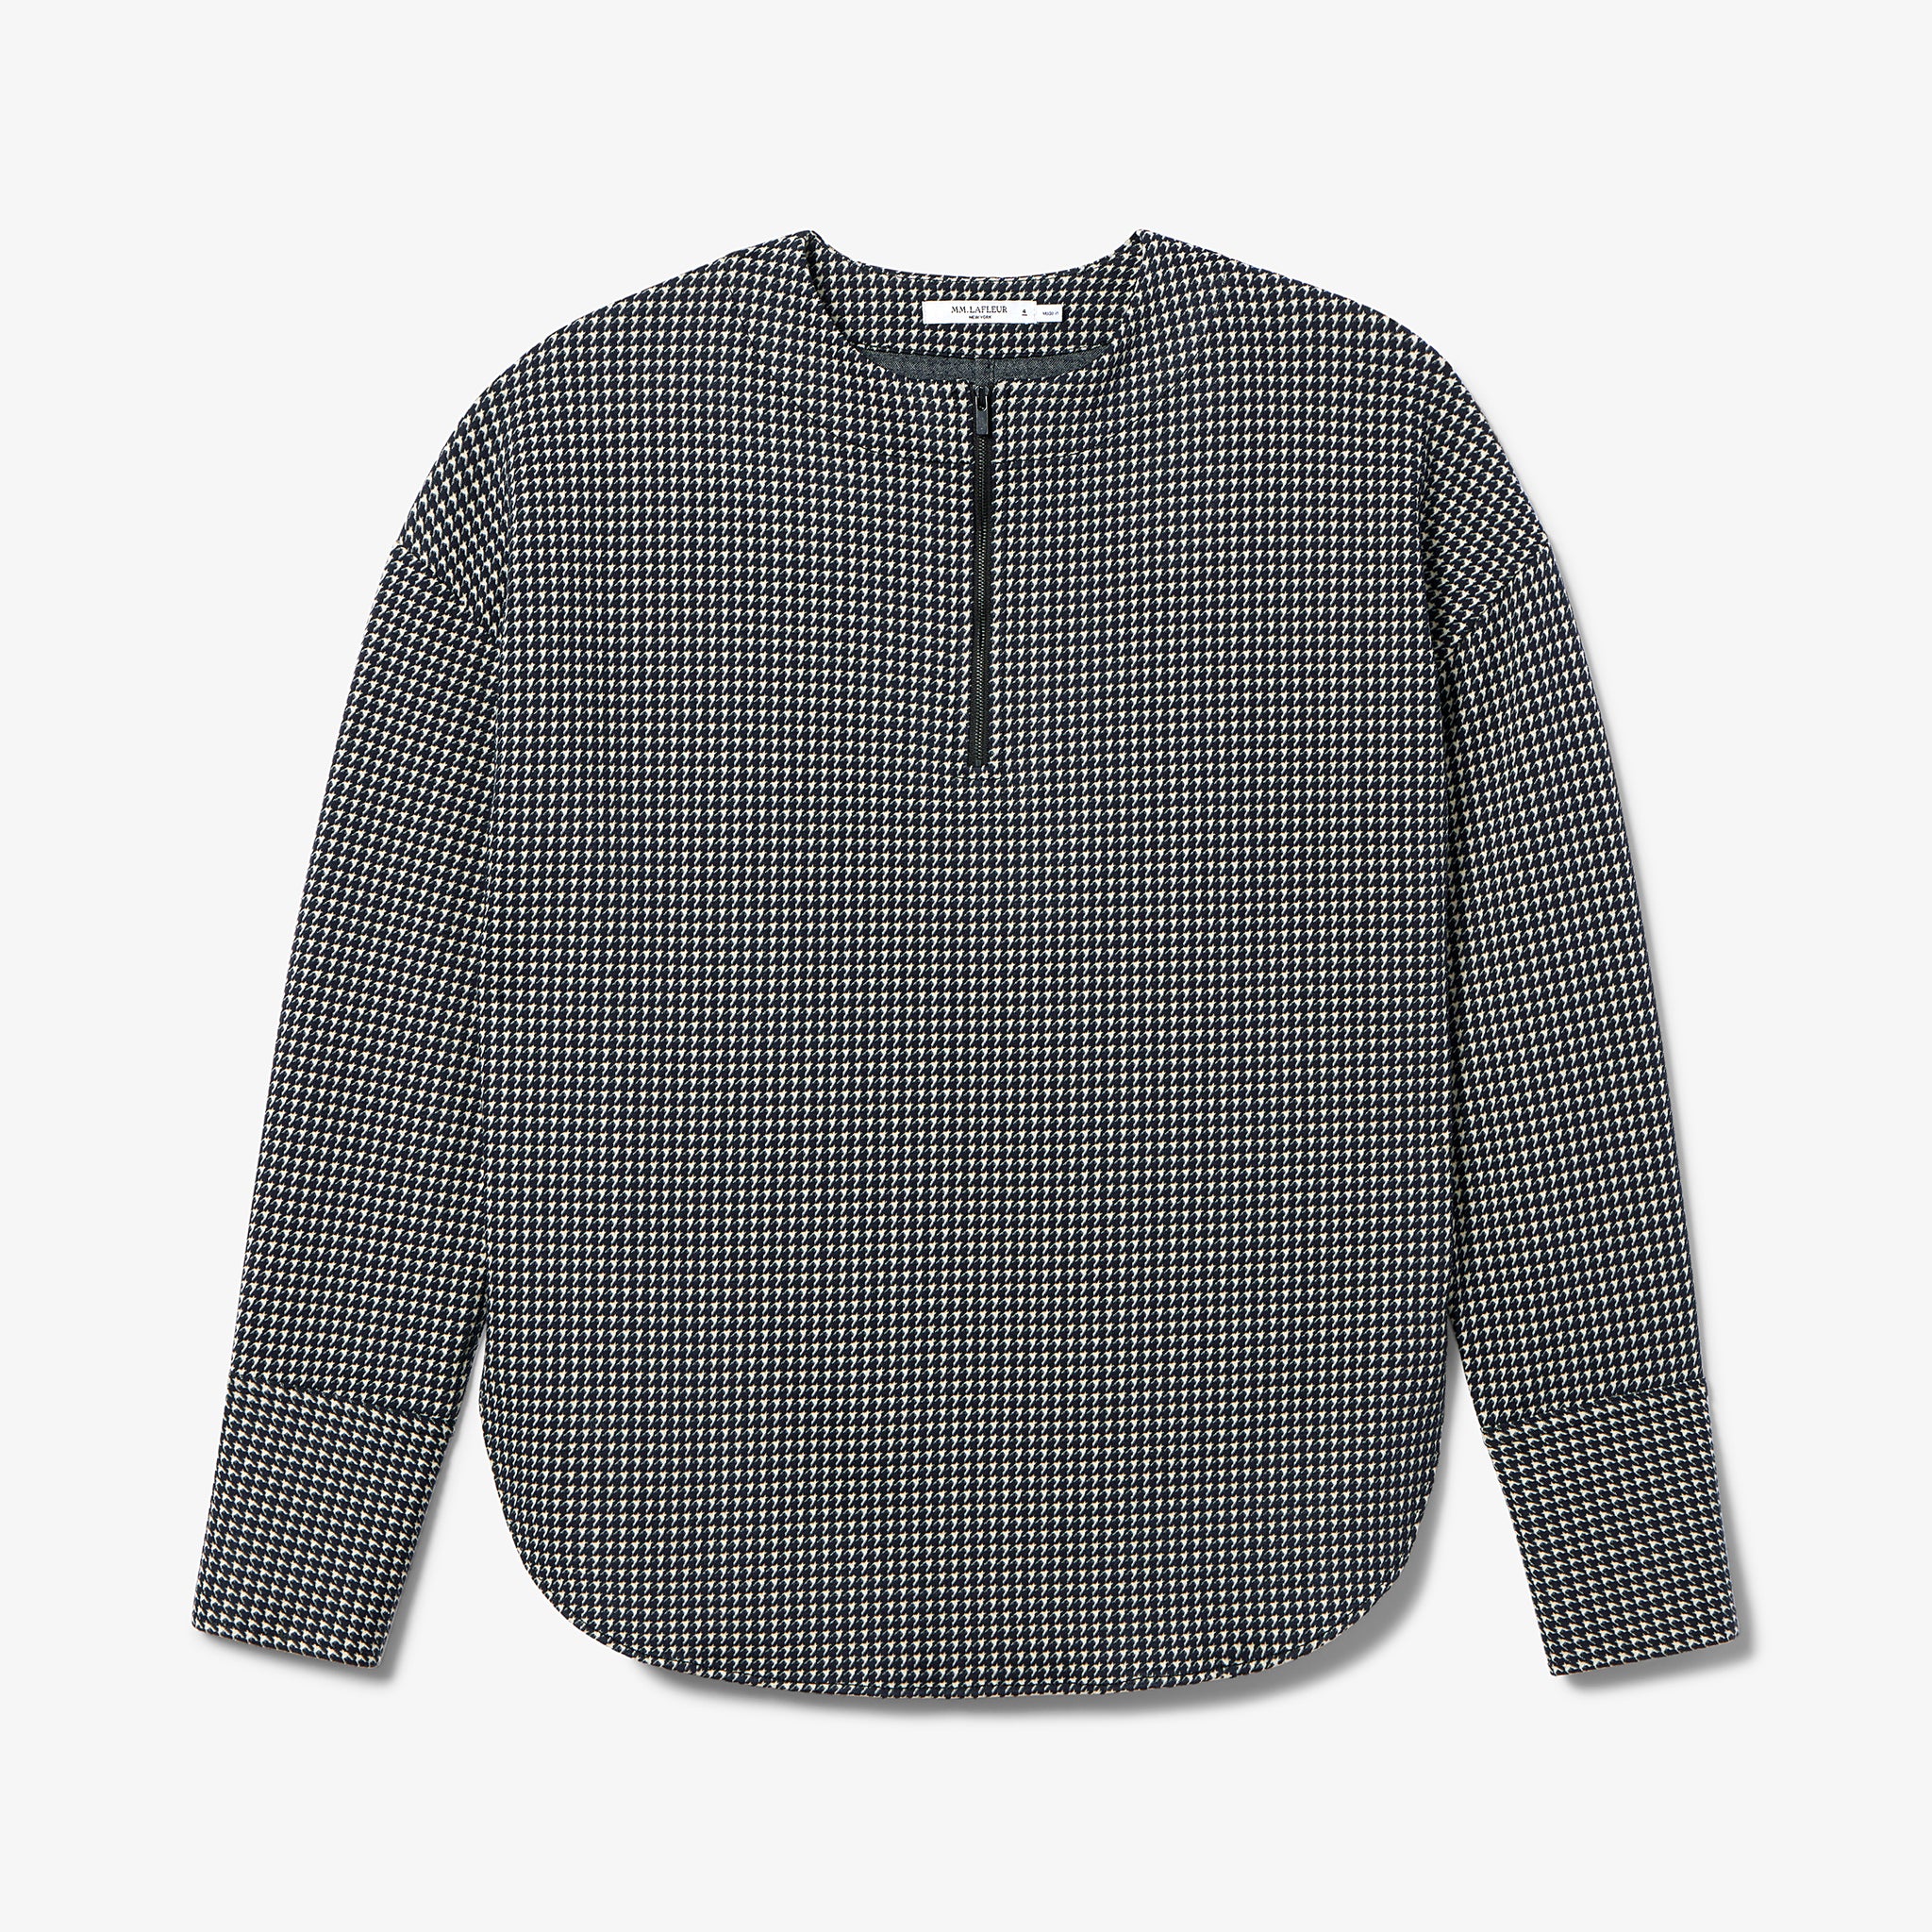 Packshot image of the tully top in black and white